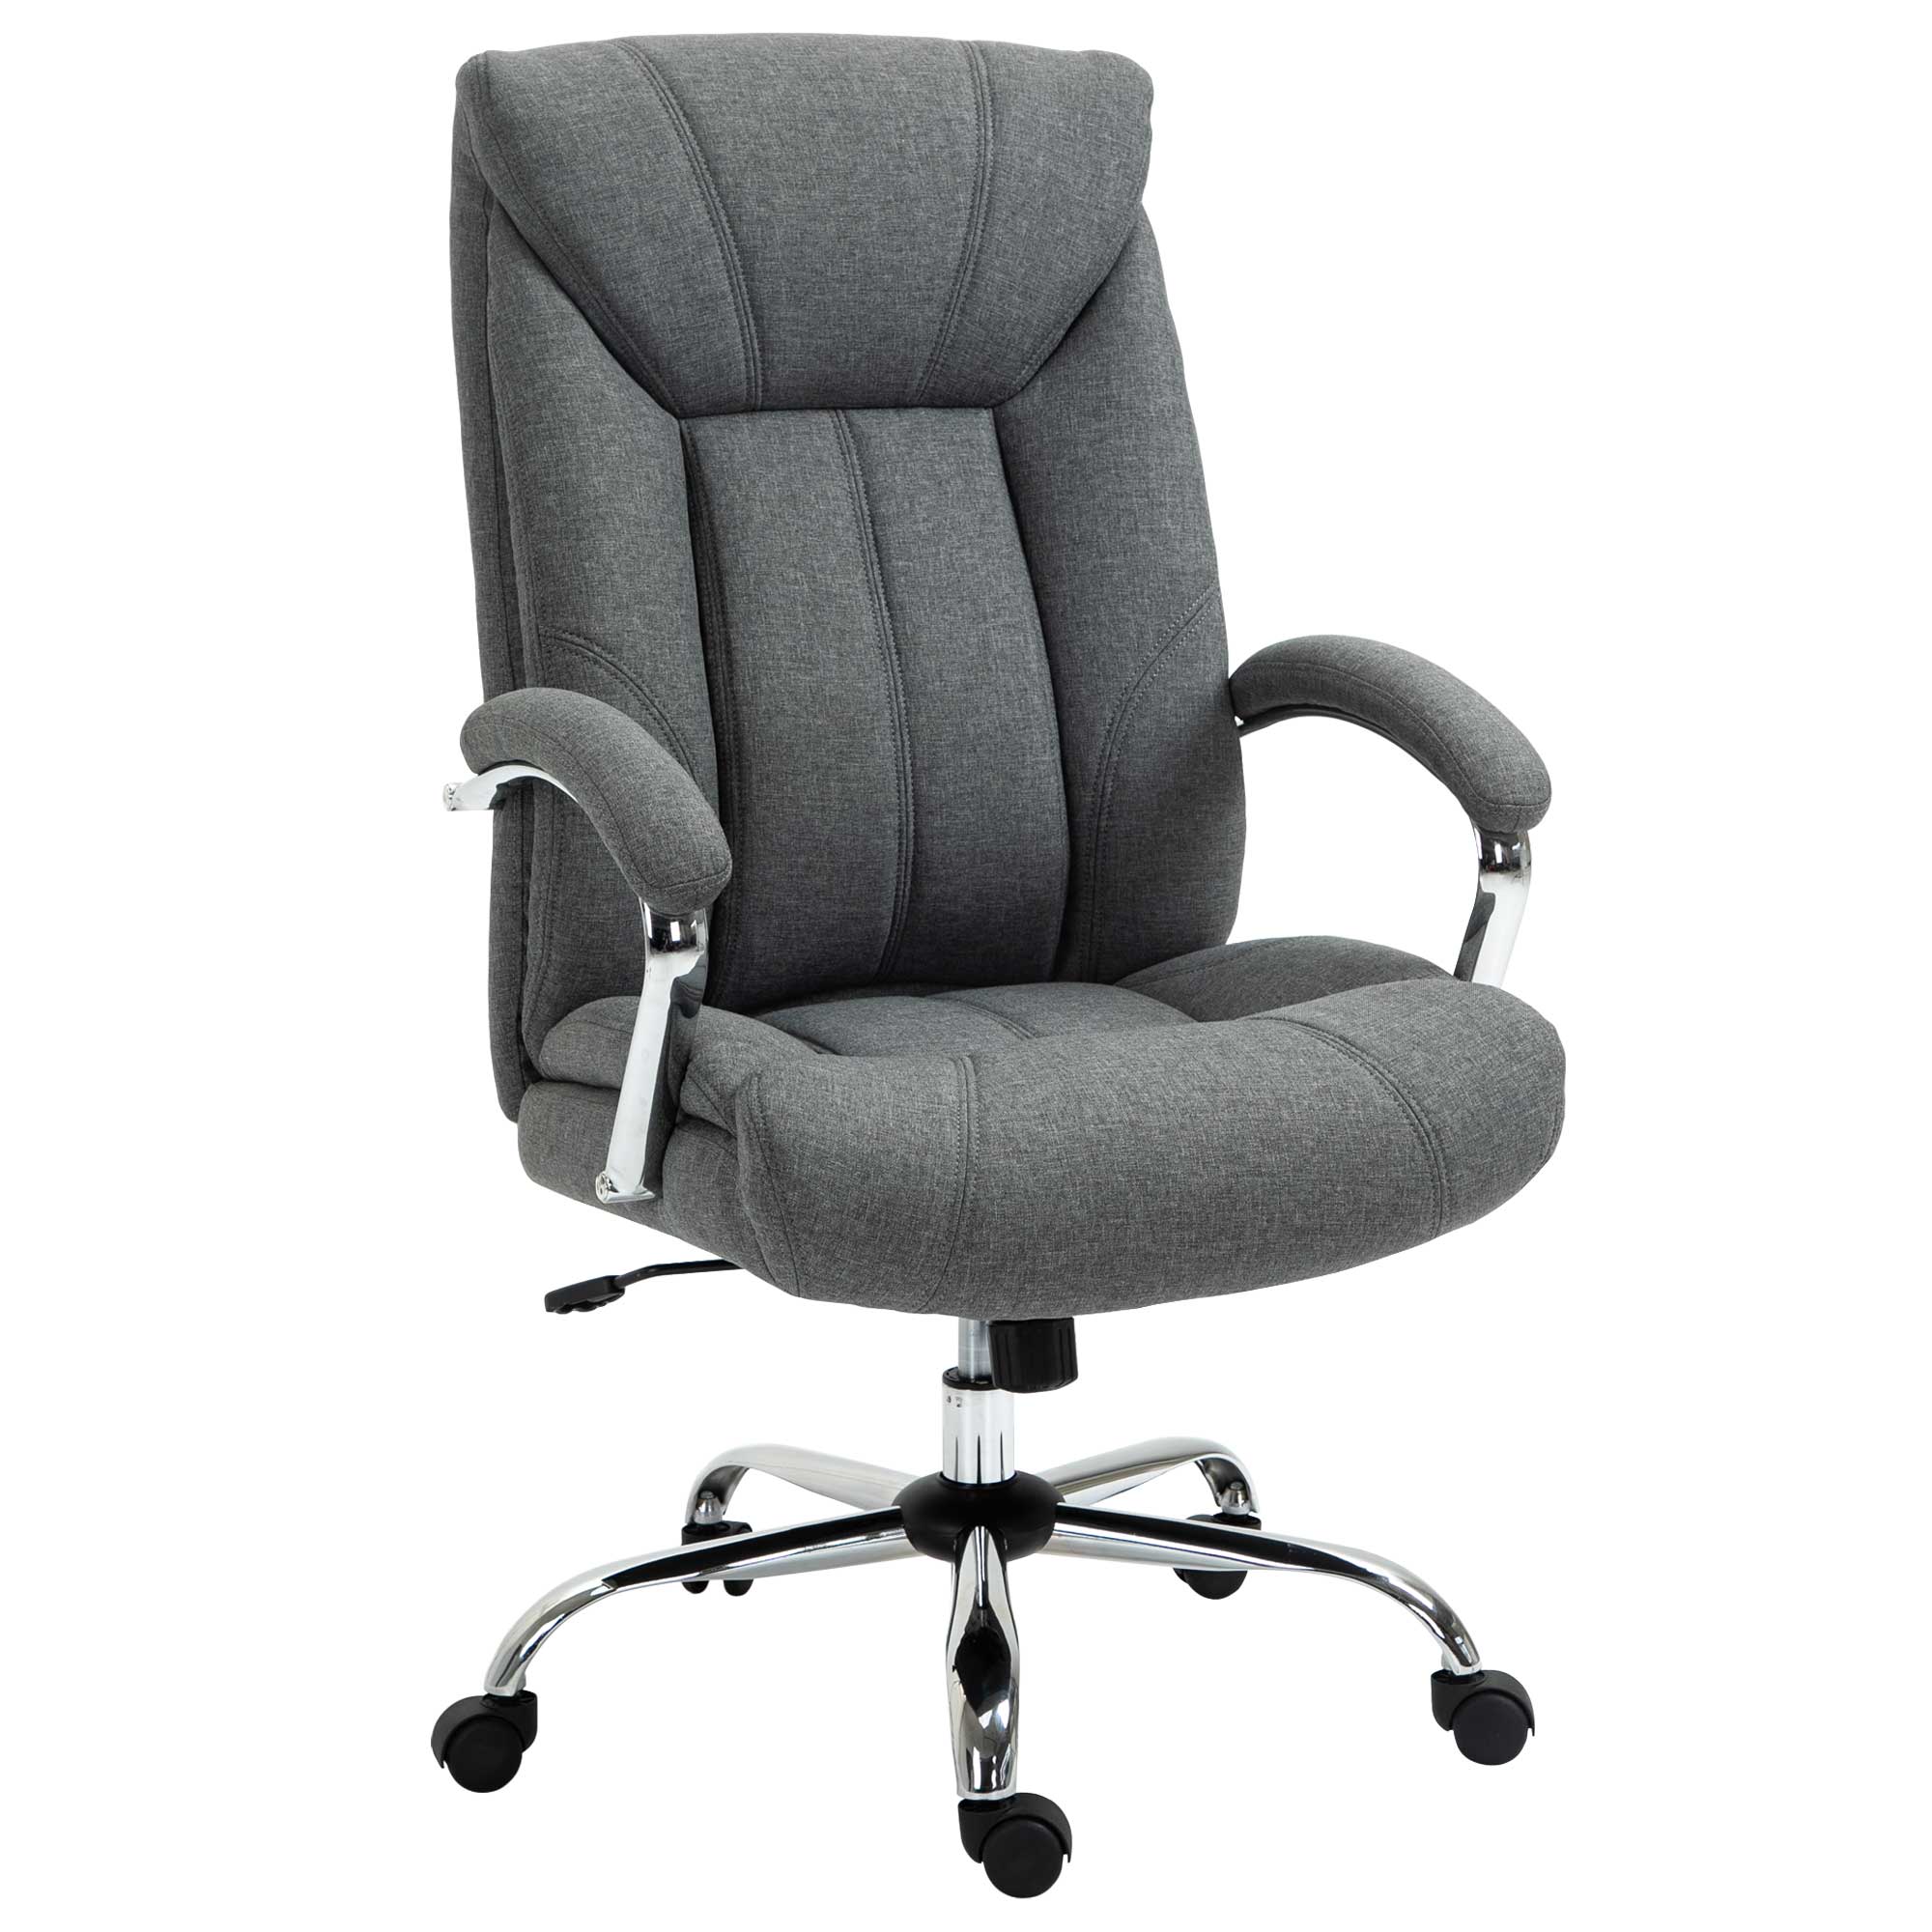 Vinsetto HOMCOM Executive High Back Office Chair Fabric with Padded Armrests Grey   Aosom.com